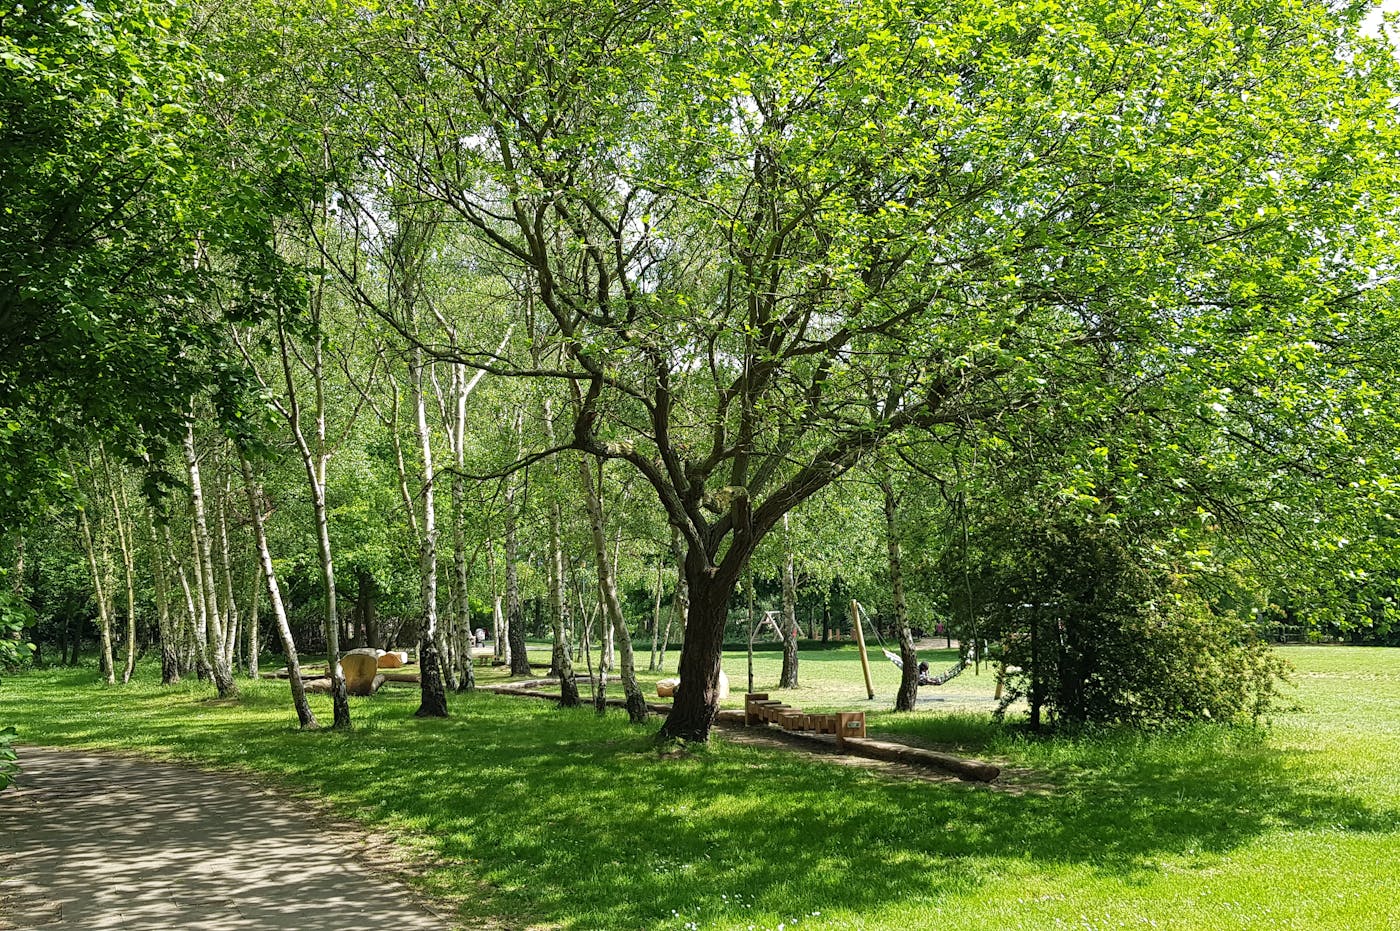 A play park with green trees